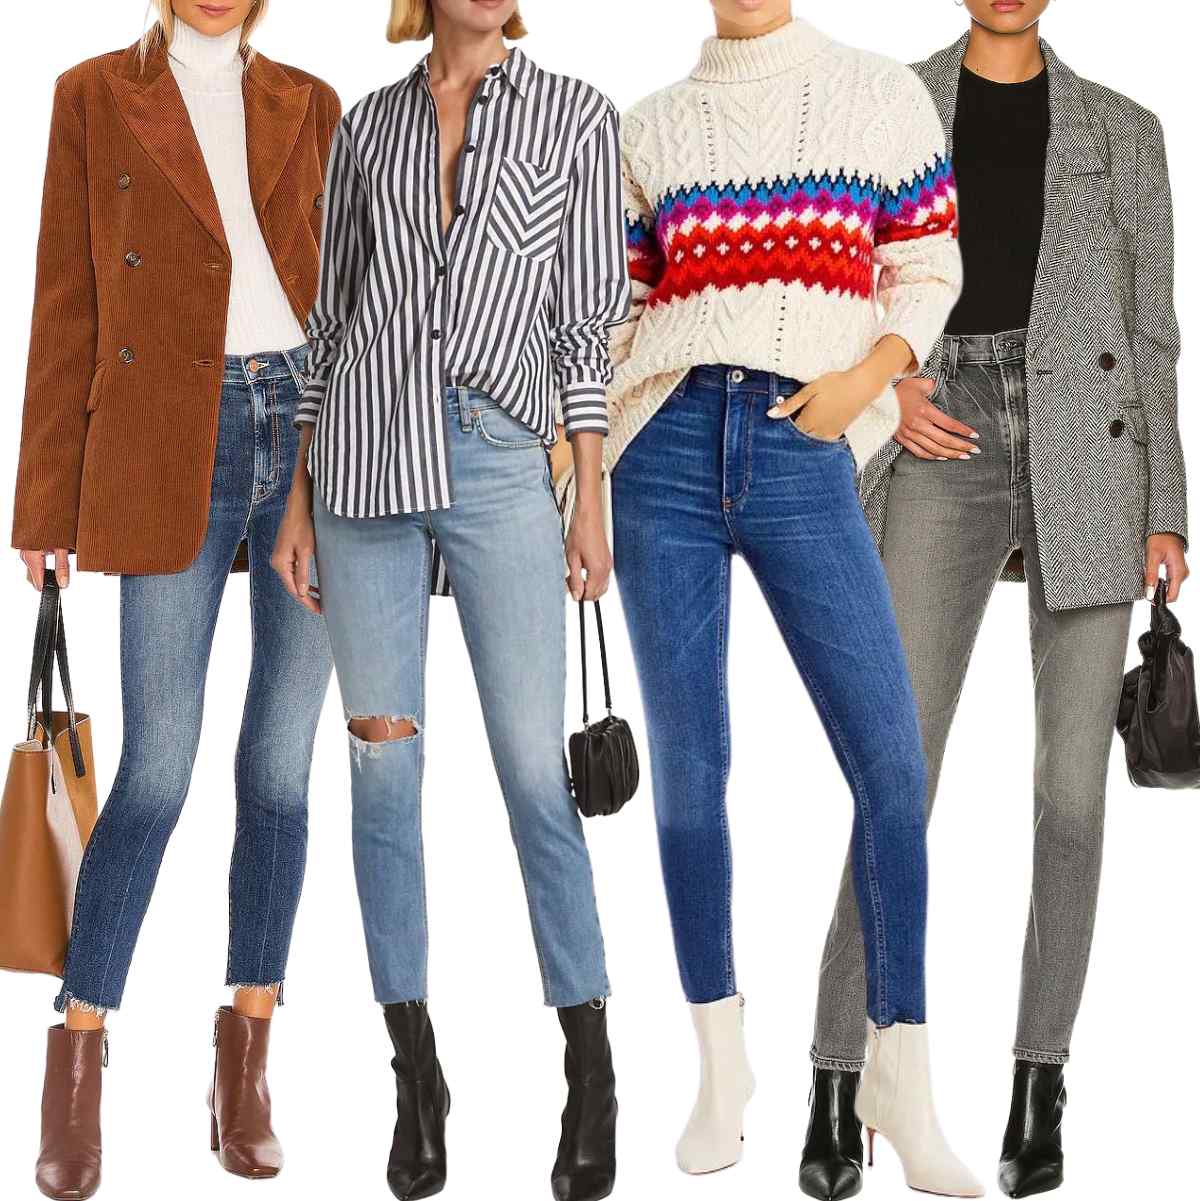 Collage of 4 women wearing ankle boot outfits with skinny jeans.